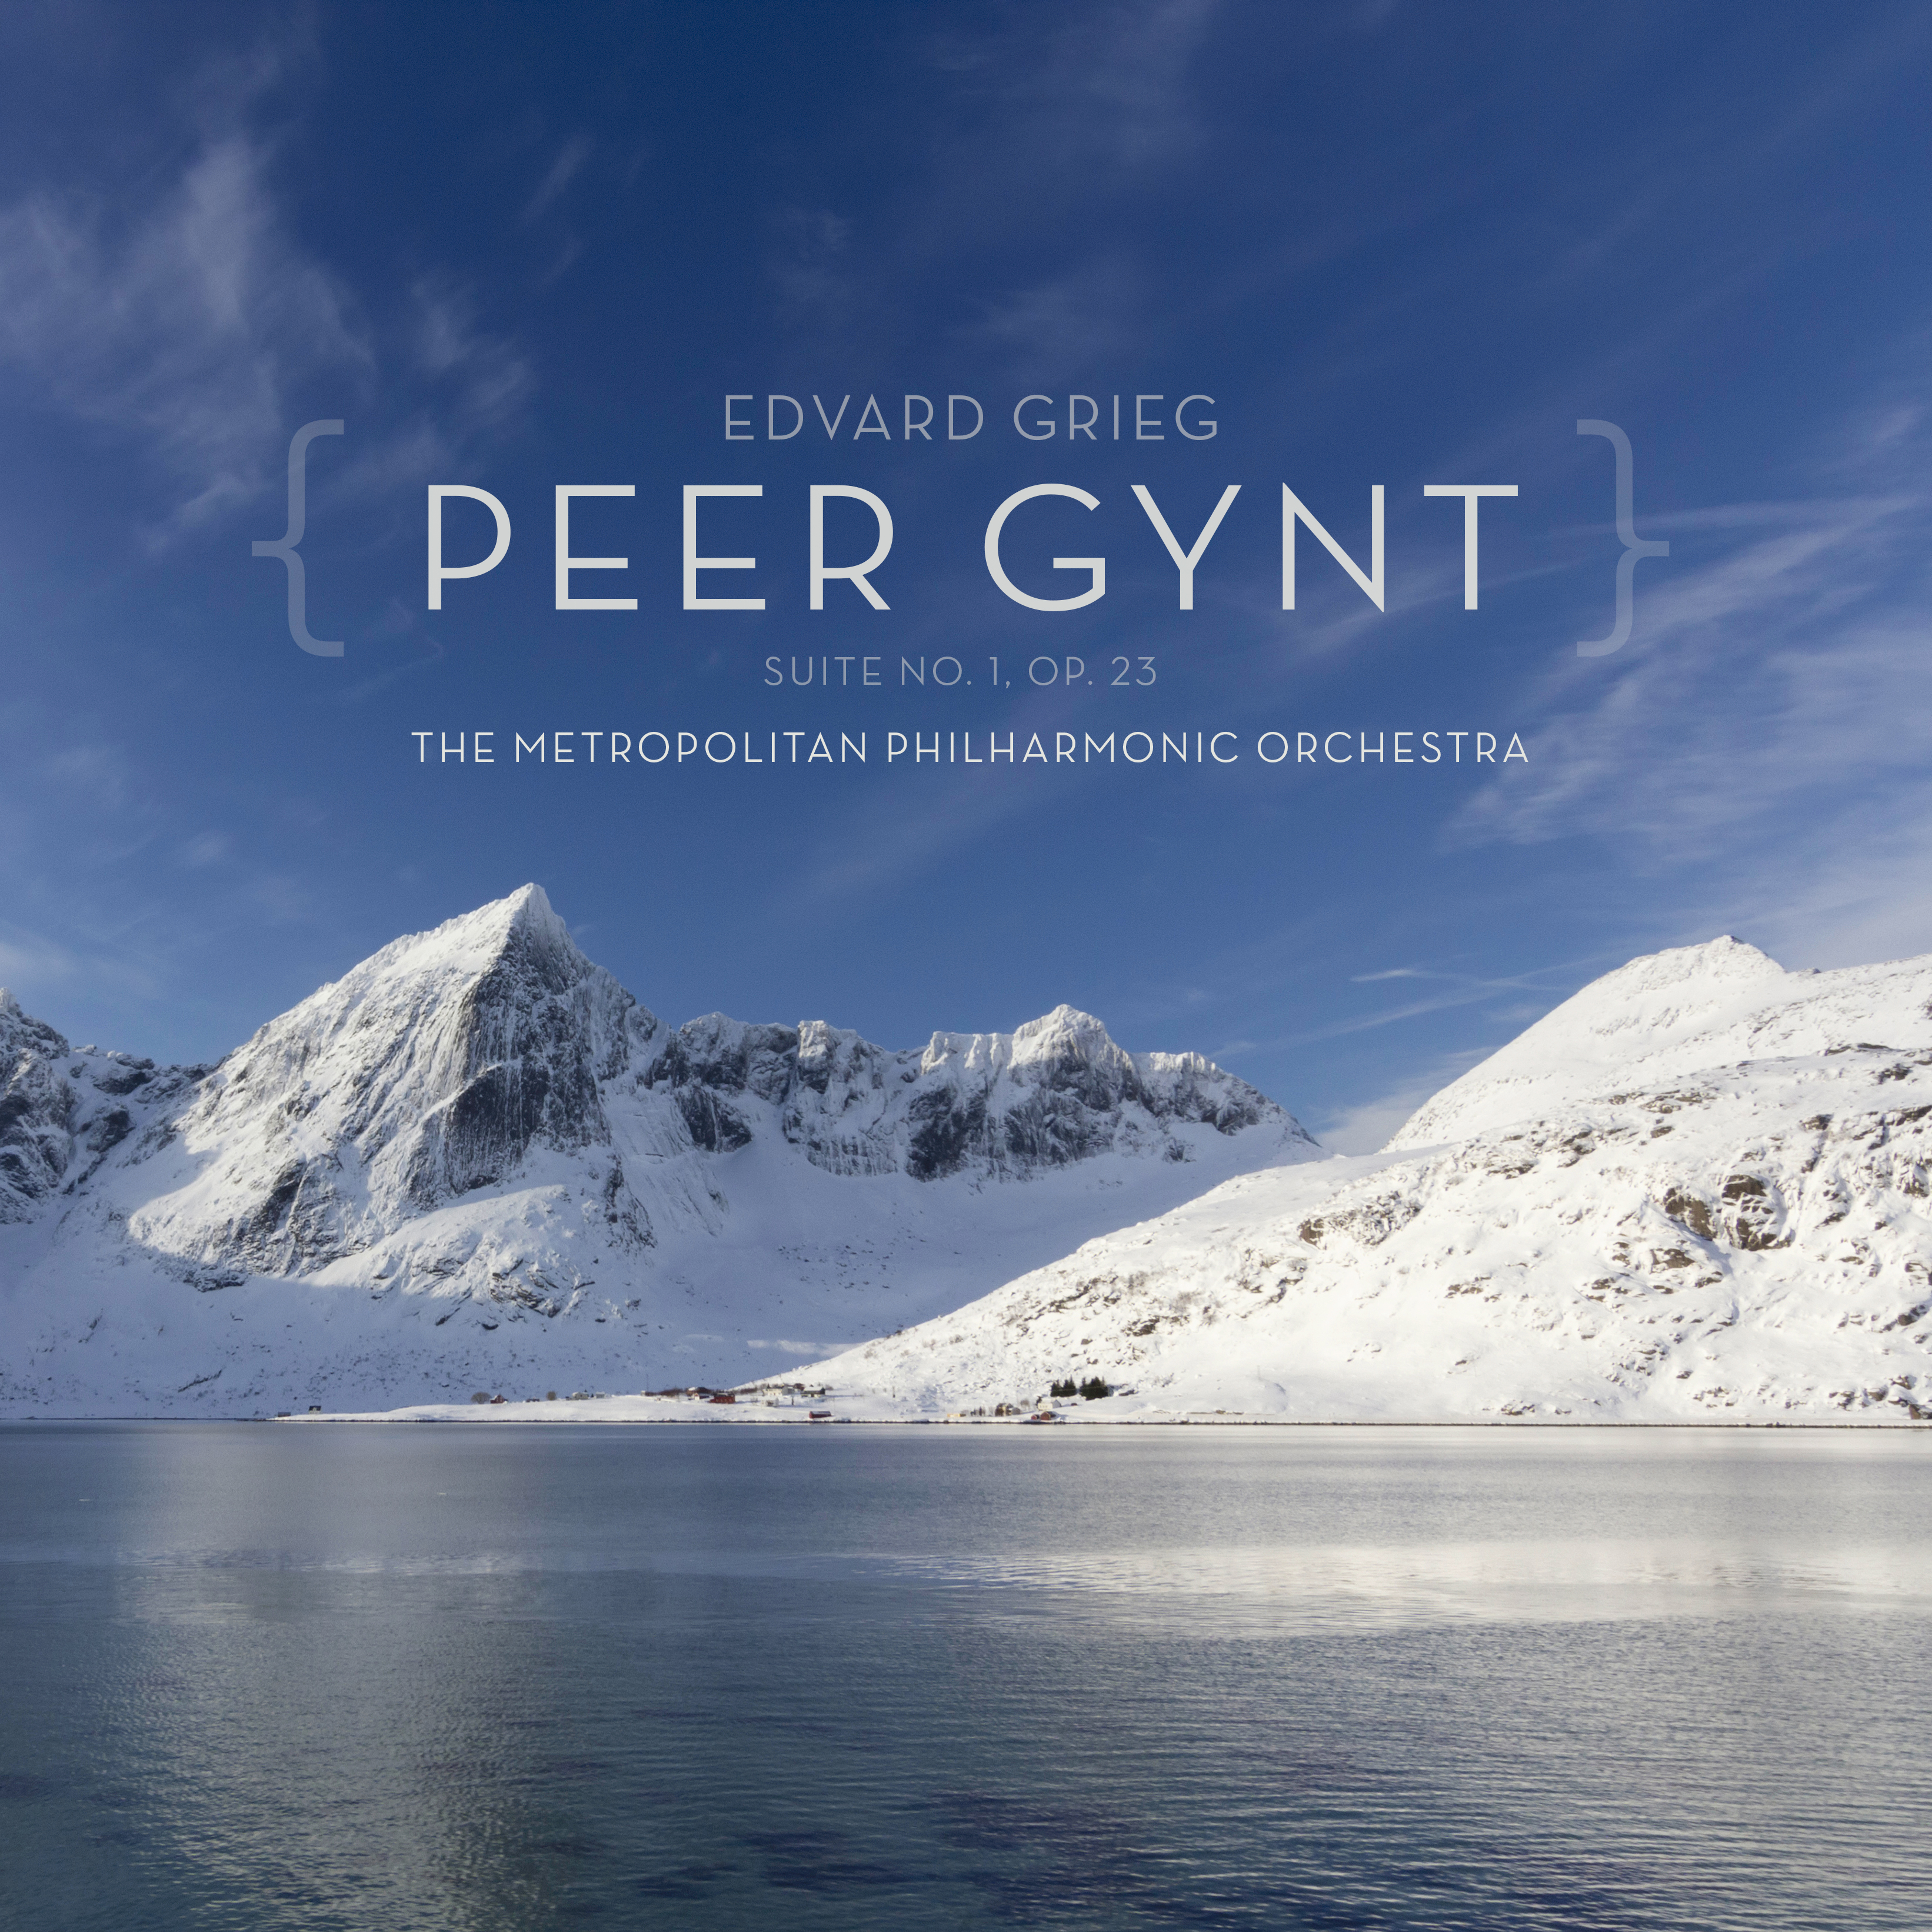 Peer Gynt, Op. 46, IV. In the Hall of the Mountain King (I Dovregubbens hall)